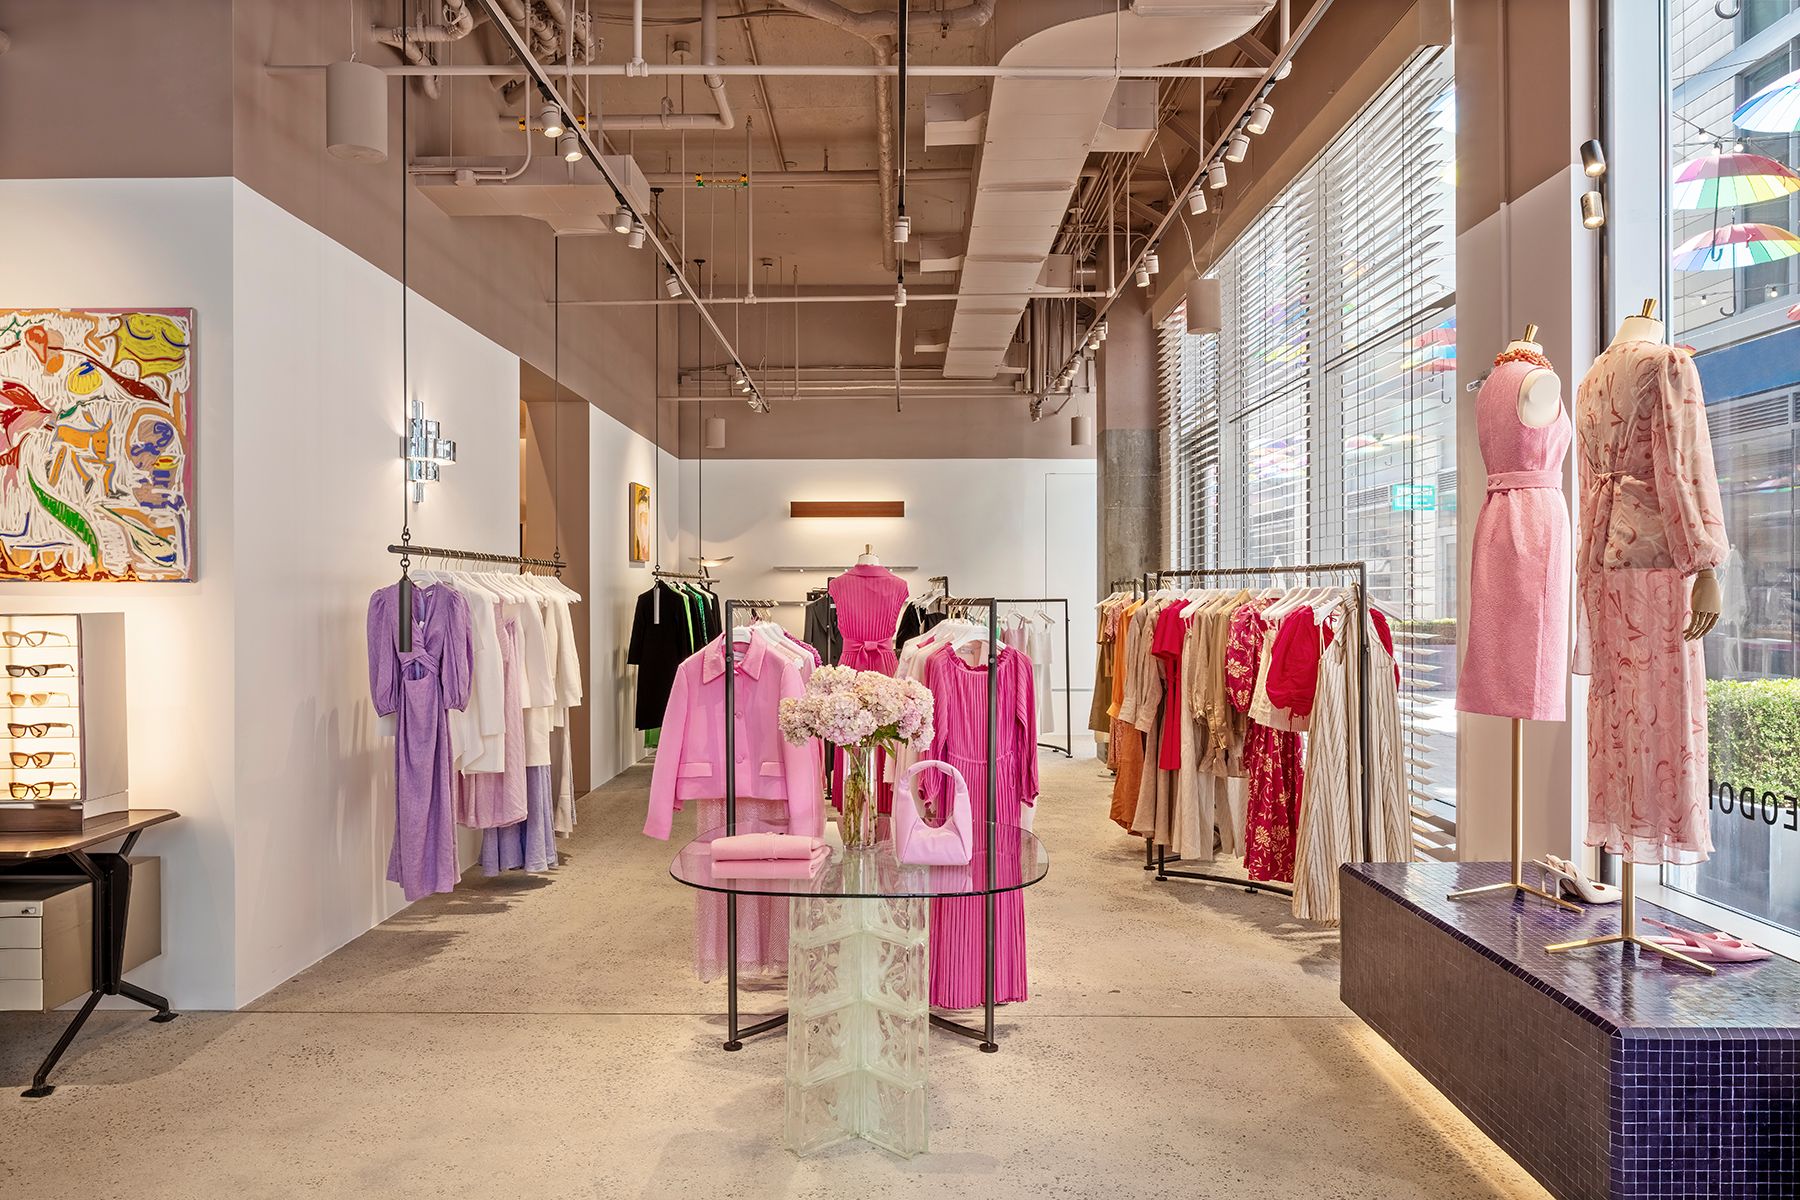 Interior view of the boutique with racks of pink, white, red and purple women's clothing